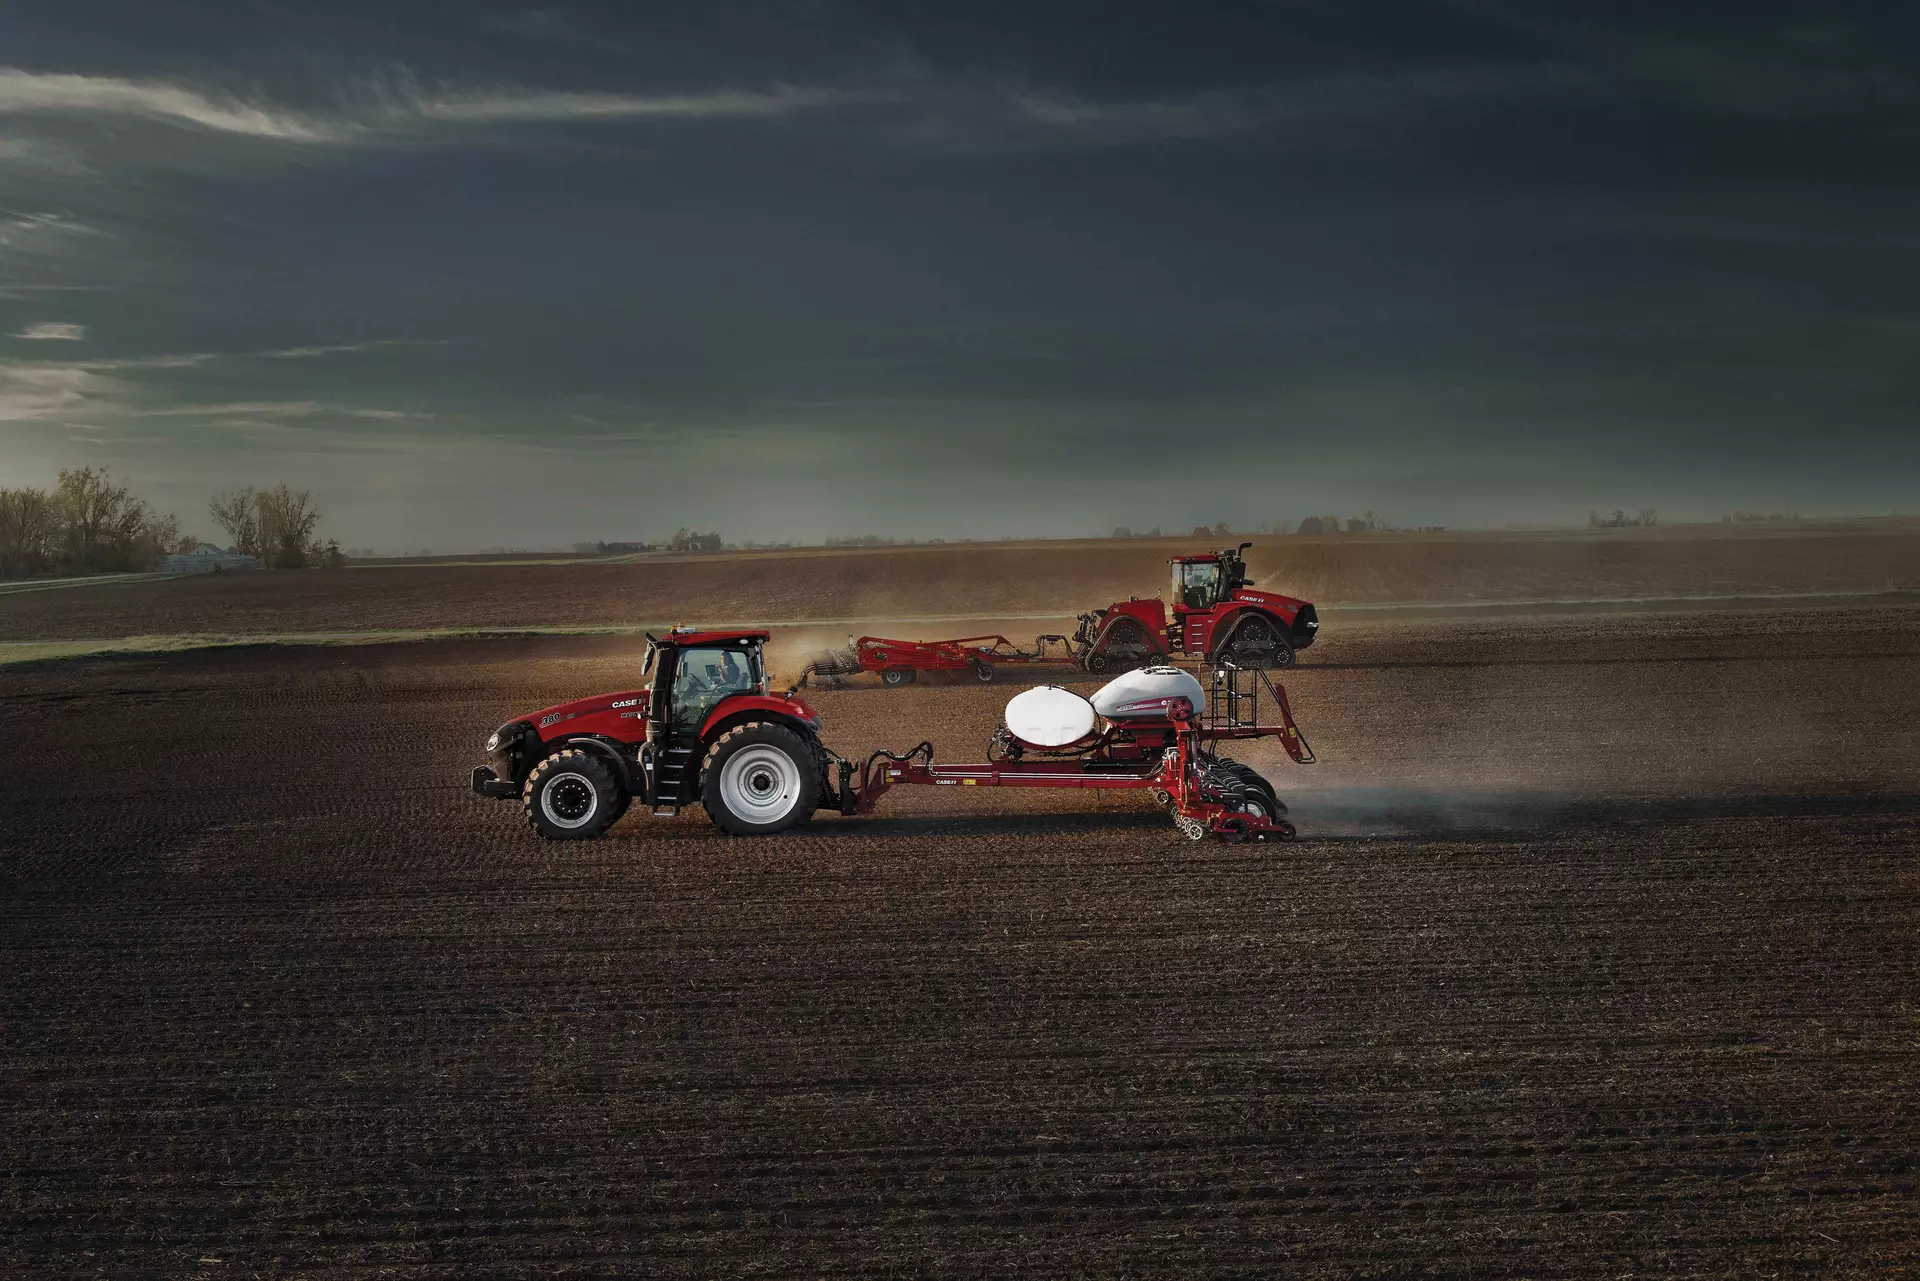 Case IH Accuguide-enabled equipment